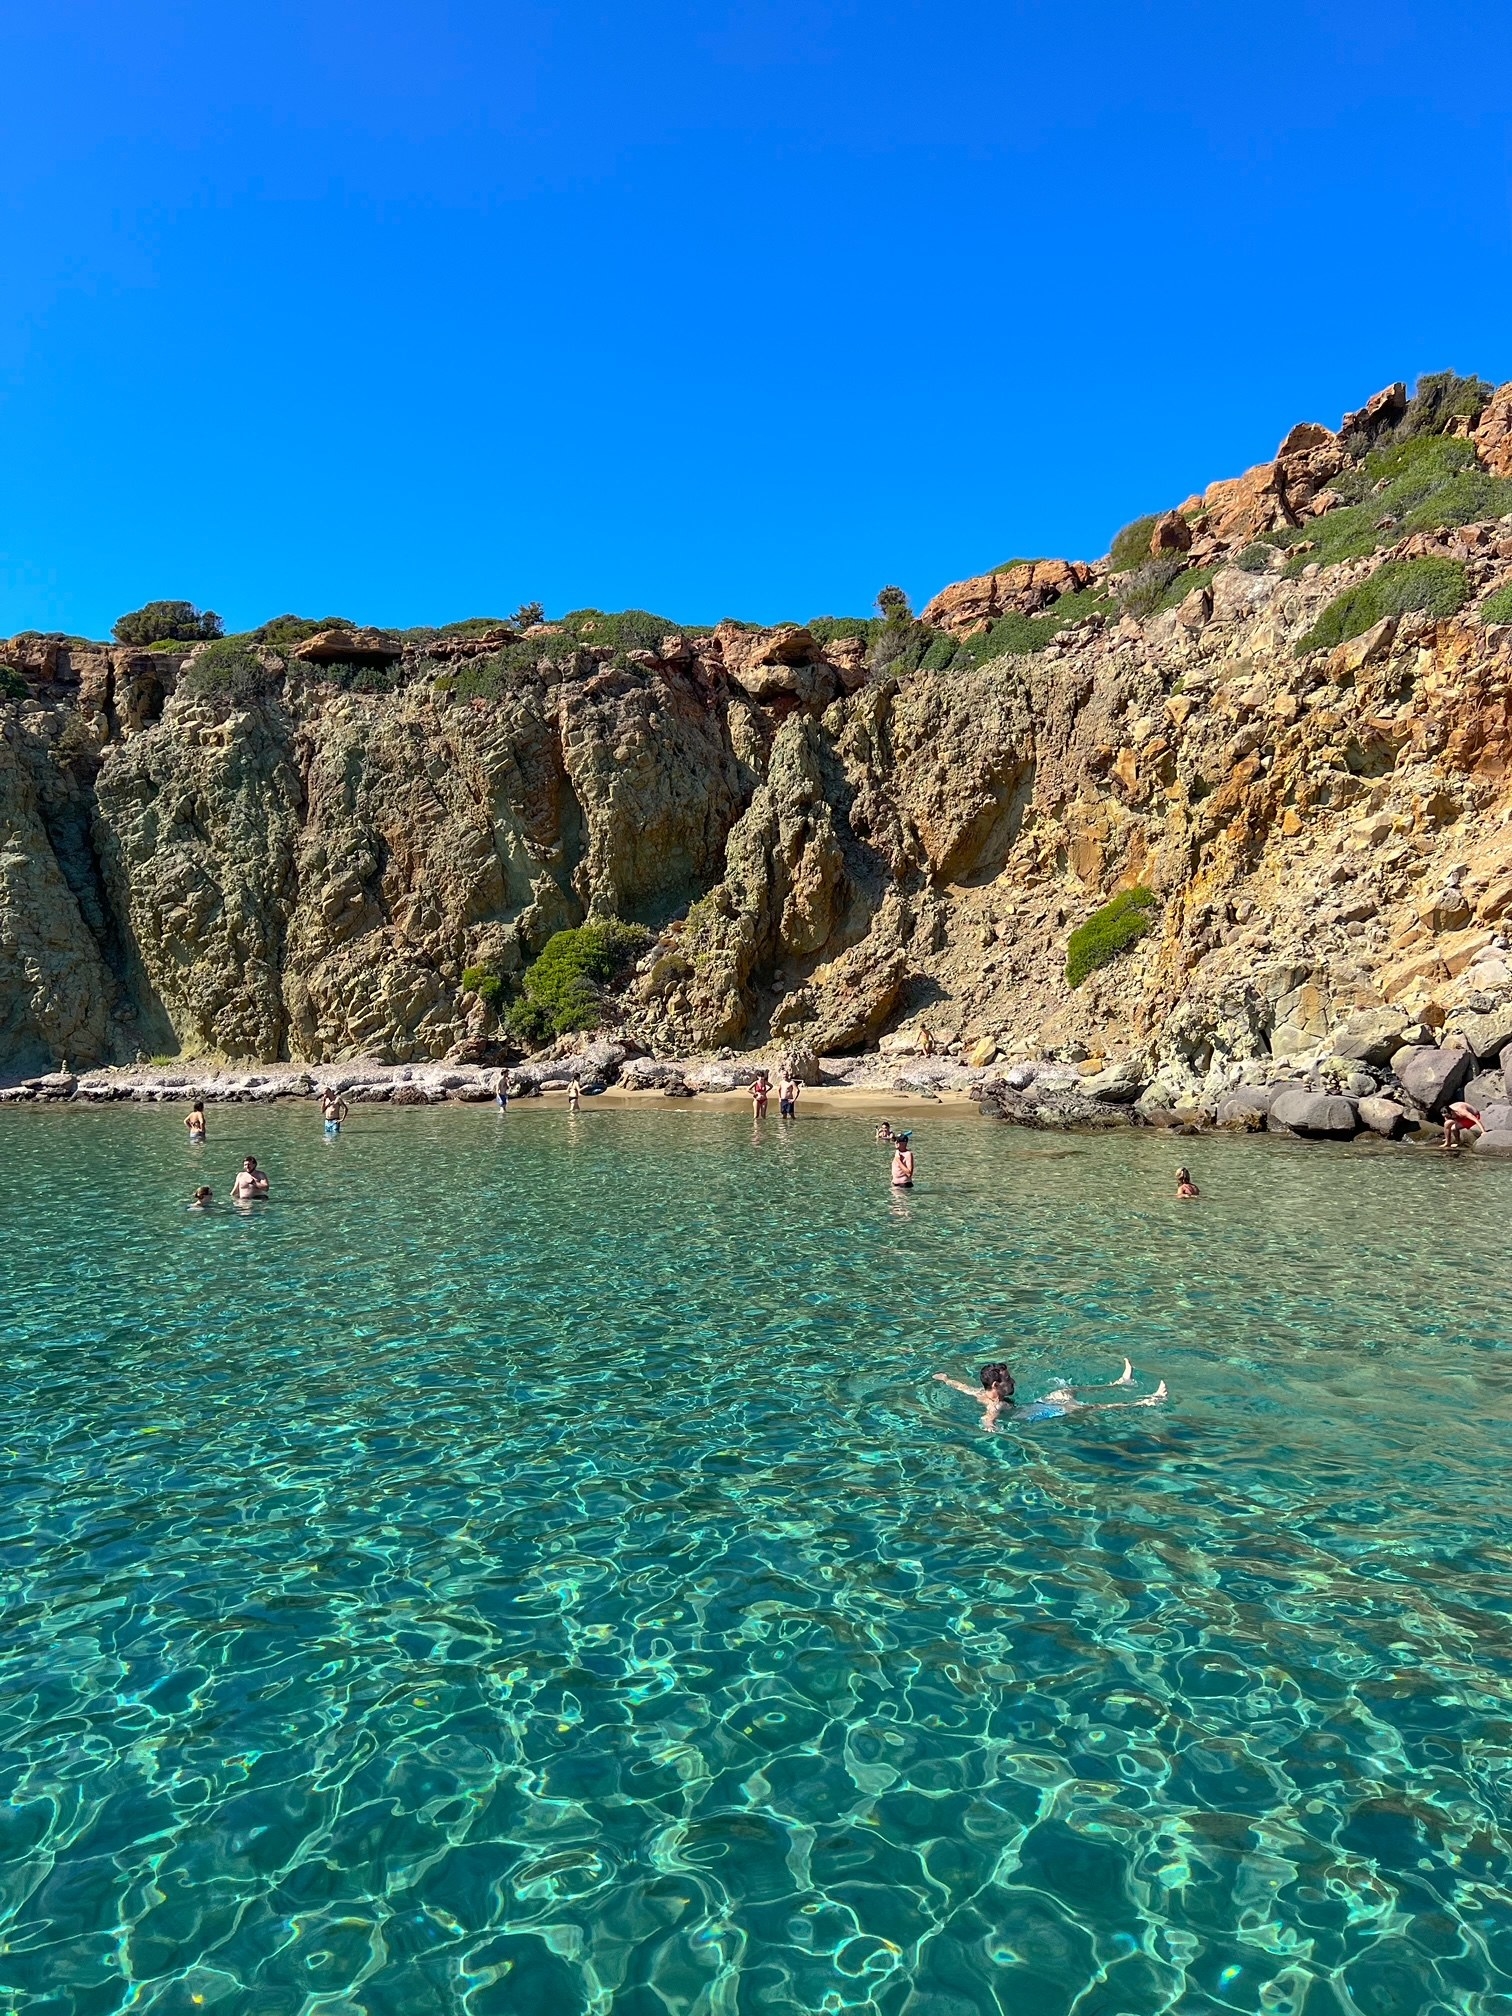 Blue water and people swimming surrounded by cliffs.